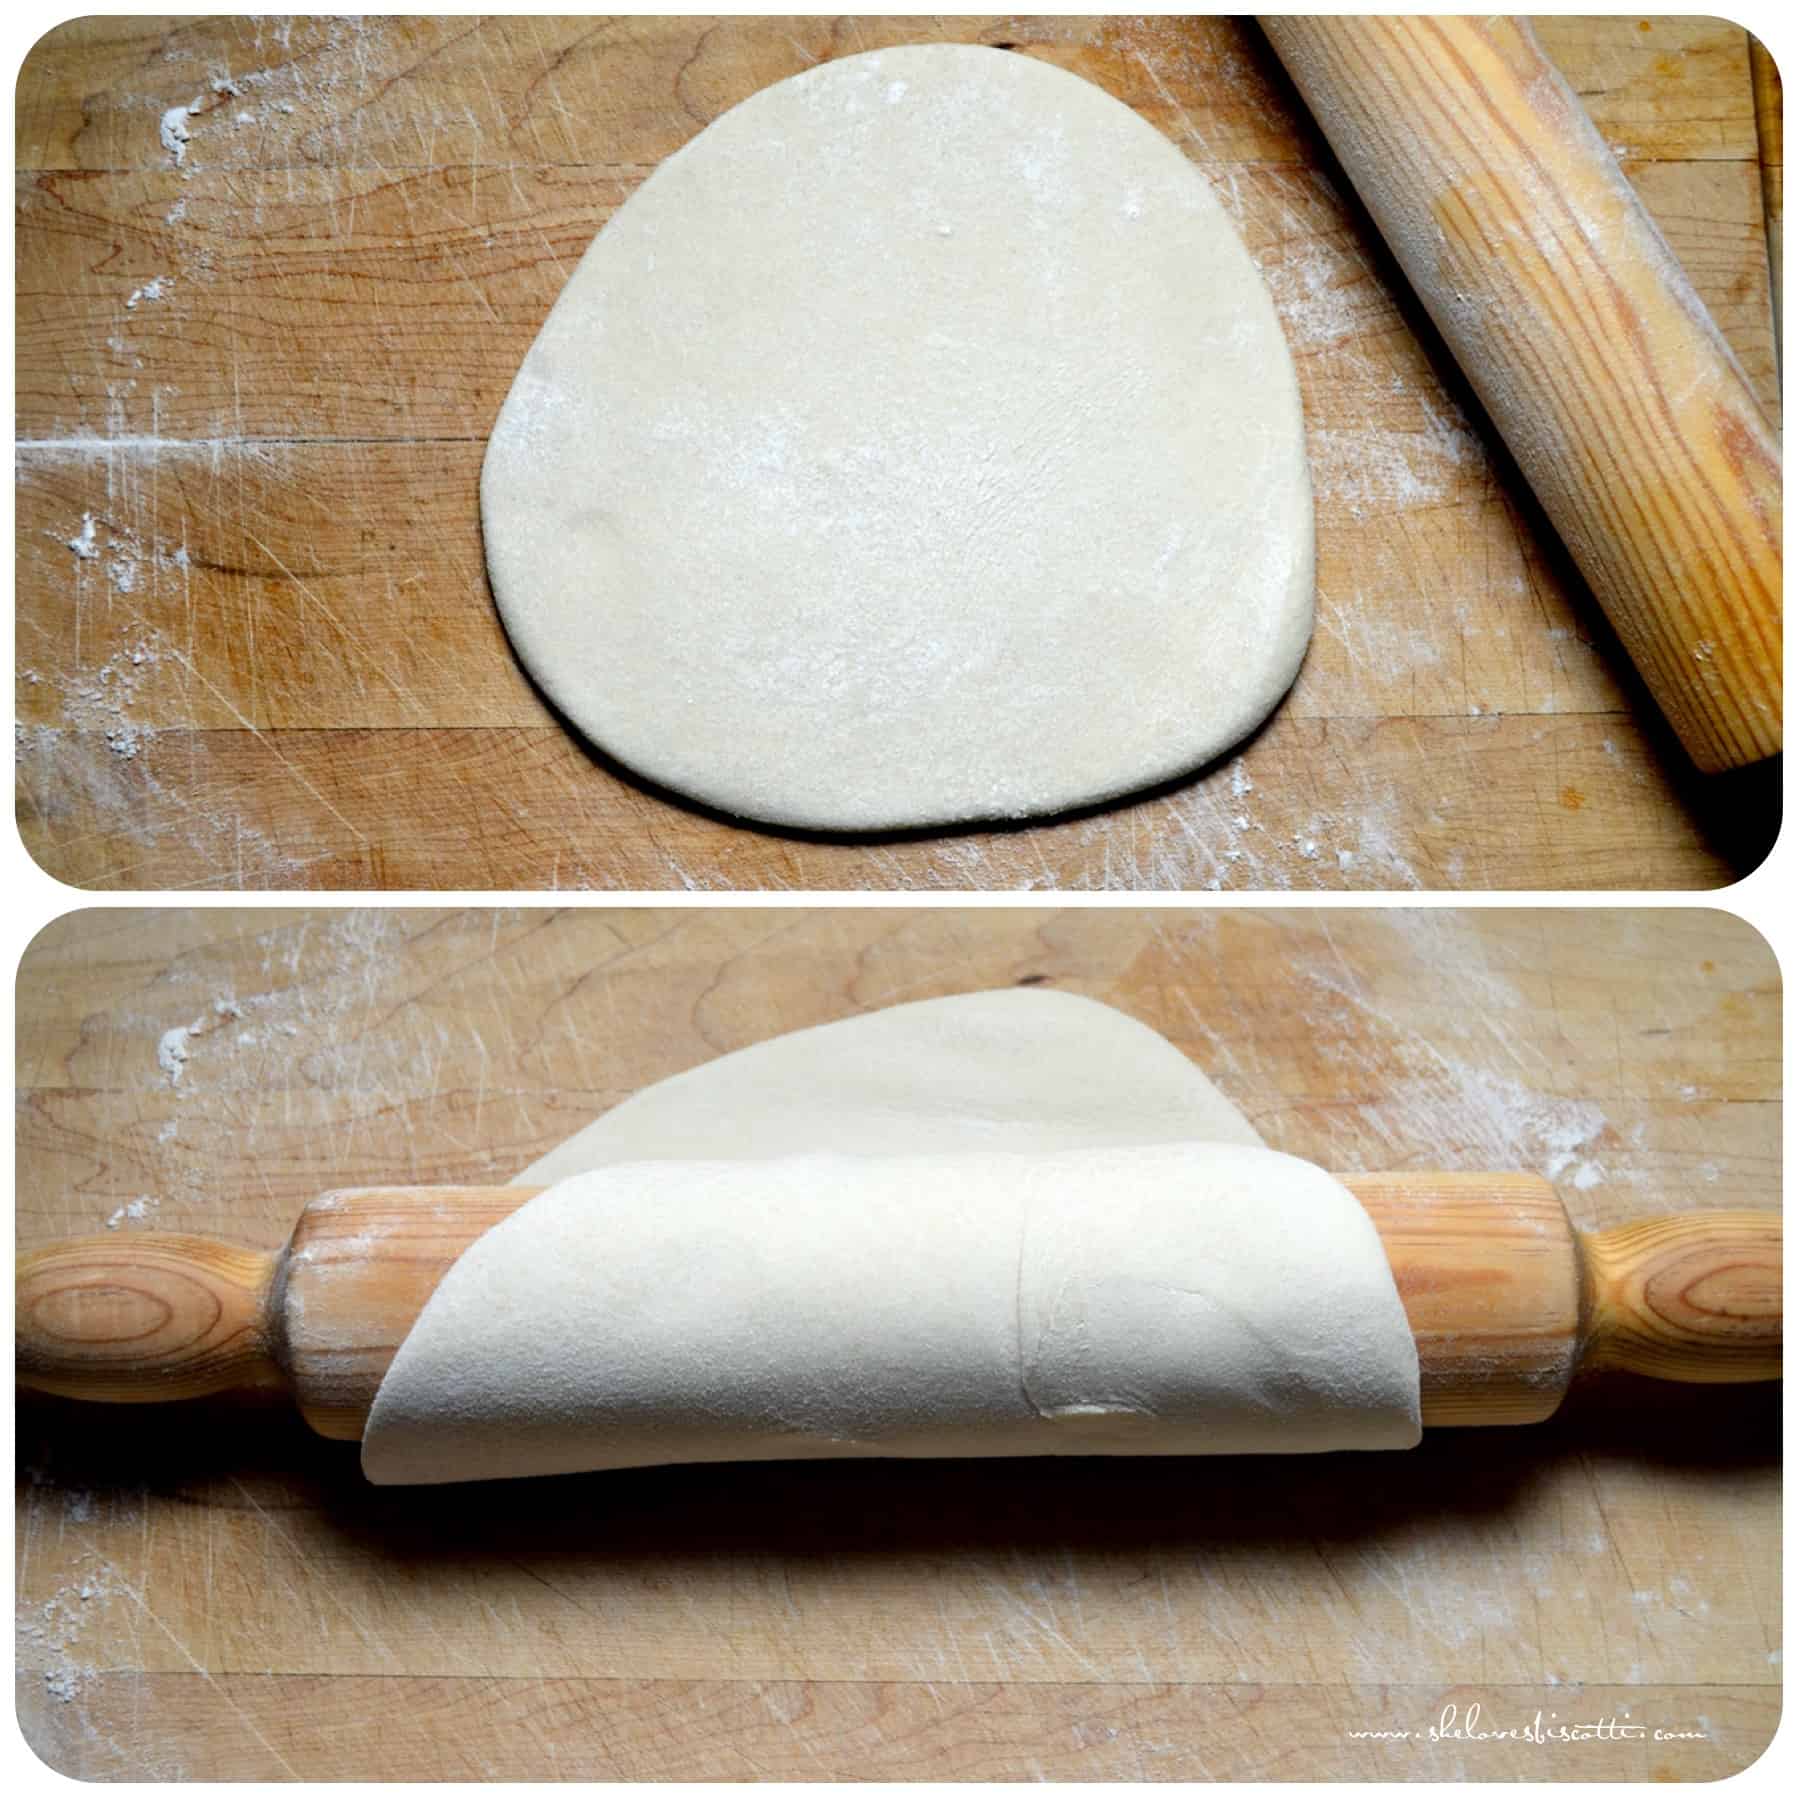 Step by step photo of rolled out cavatelli dough on a wooden board.